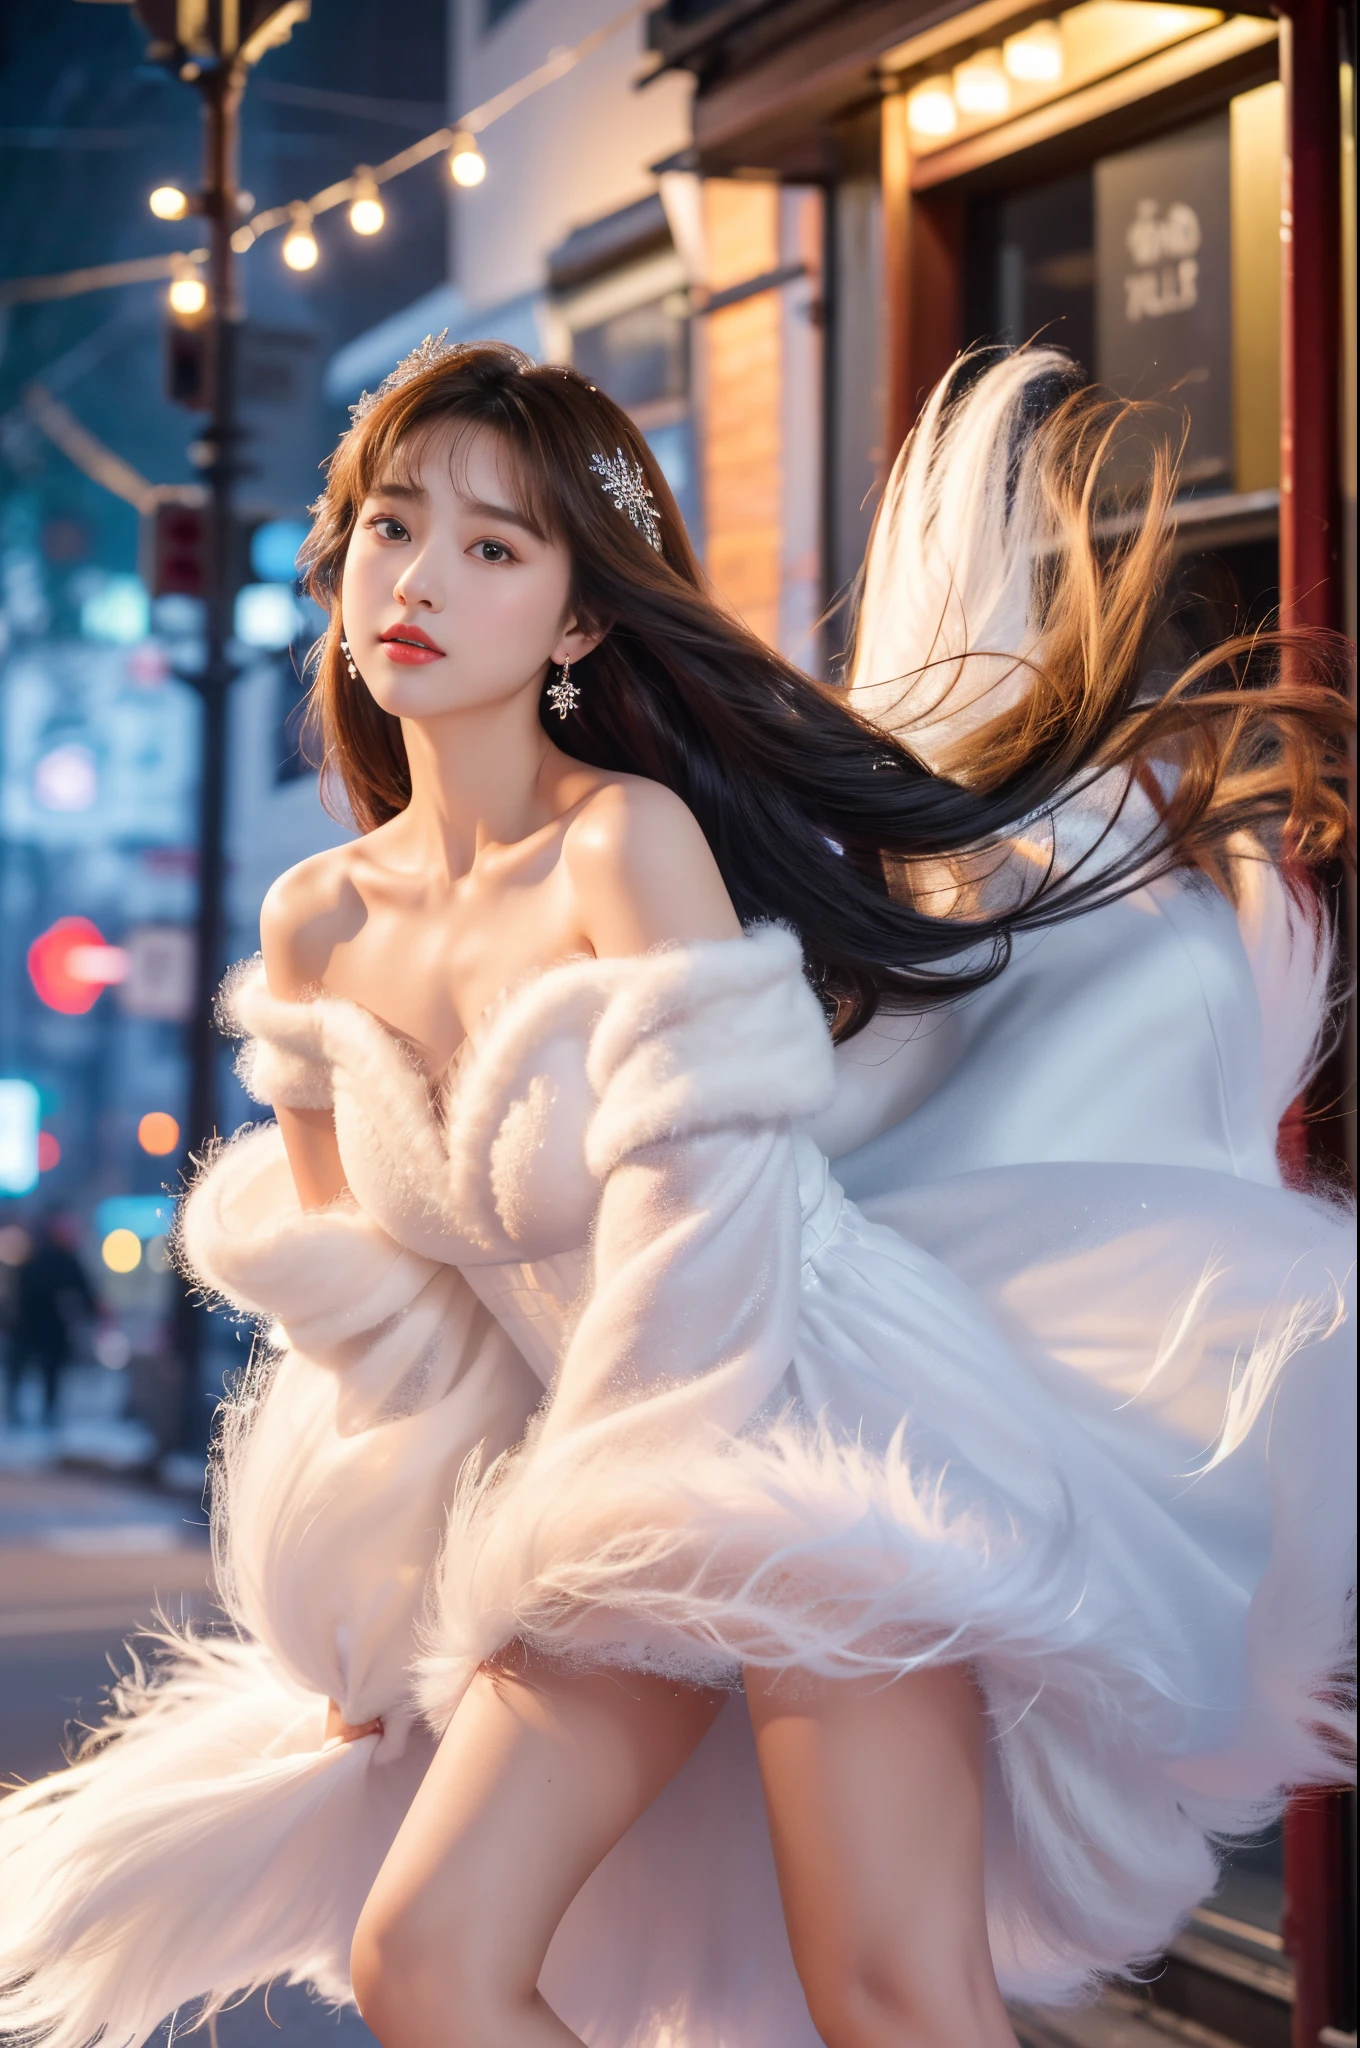 8k，tmasterpiece、quality、ultra - detailed、Master workarilyn Takiocus on the thighs and above，Clear face，（Best quality）， beuaty girl：1.5、((Red fluffy off-shoulder dress style))，long hair fluttering，Snowflake earrings、snowflakes falling、bblurry、the street，